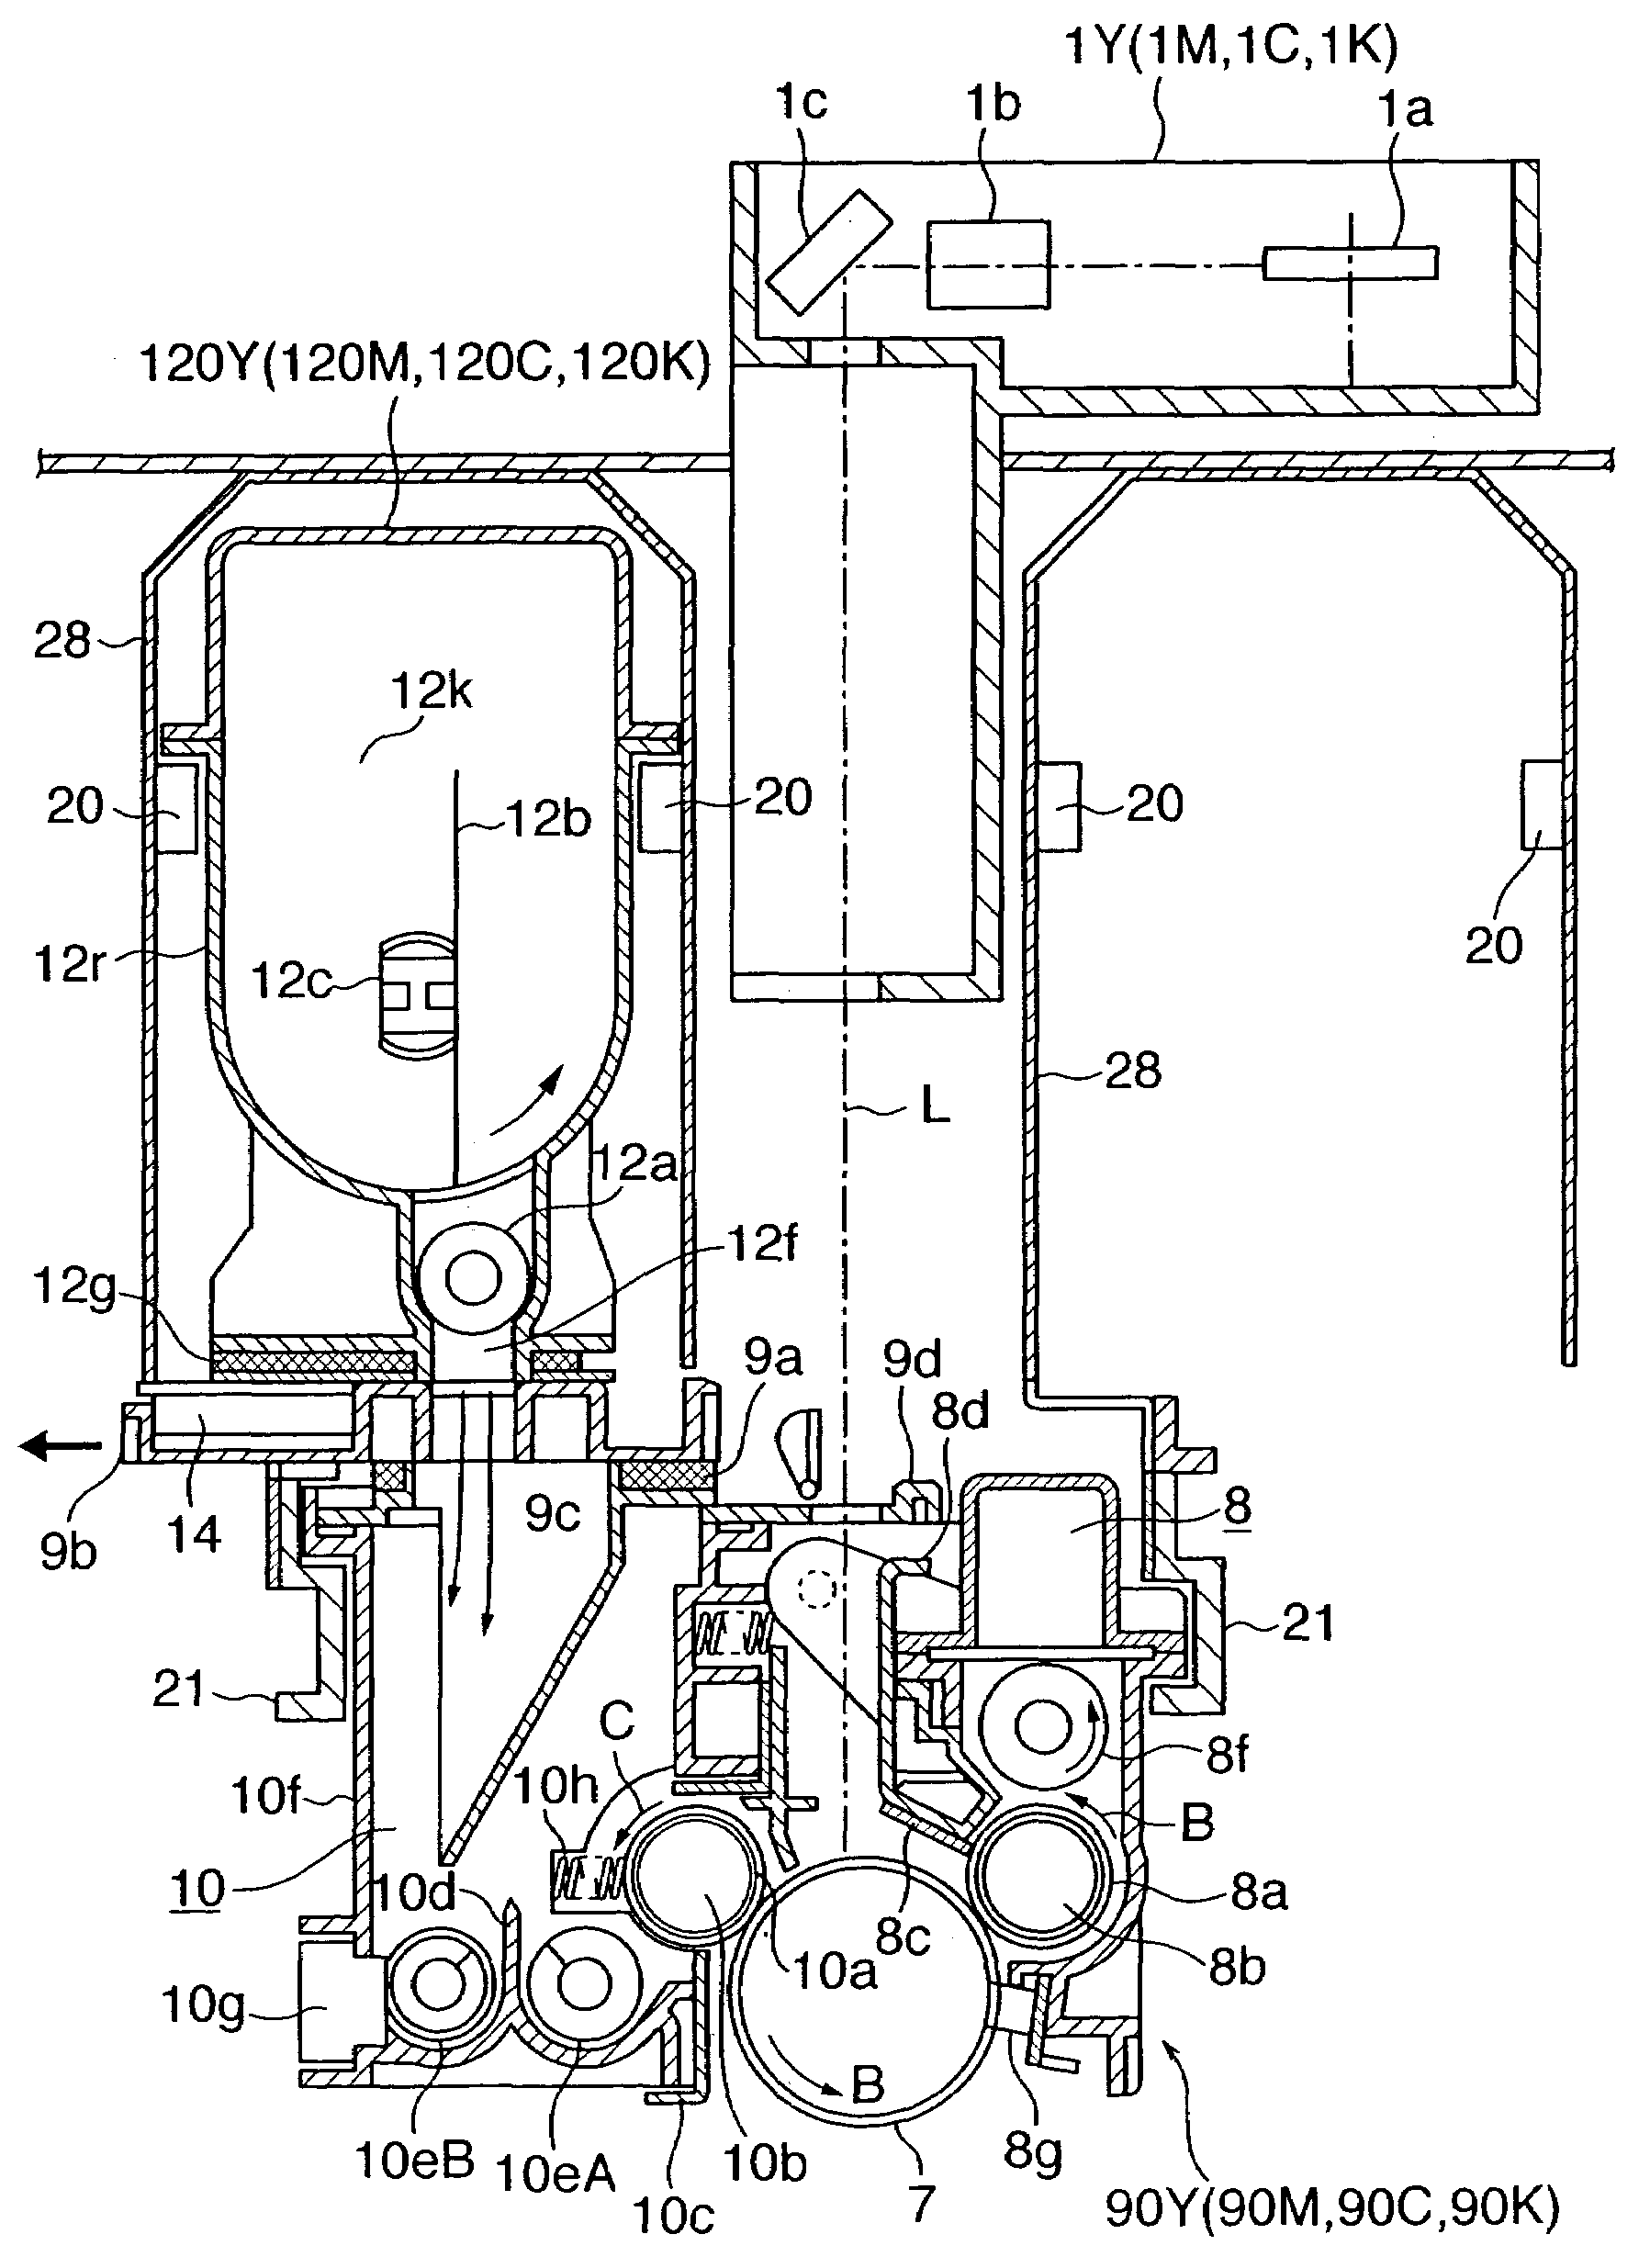 Image forming apparatus with a toner replenishing control feature based on stored toner density and fluidity information, related method, and developing agent replenishing container for same